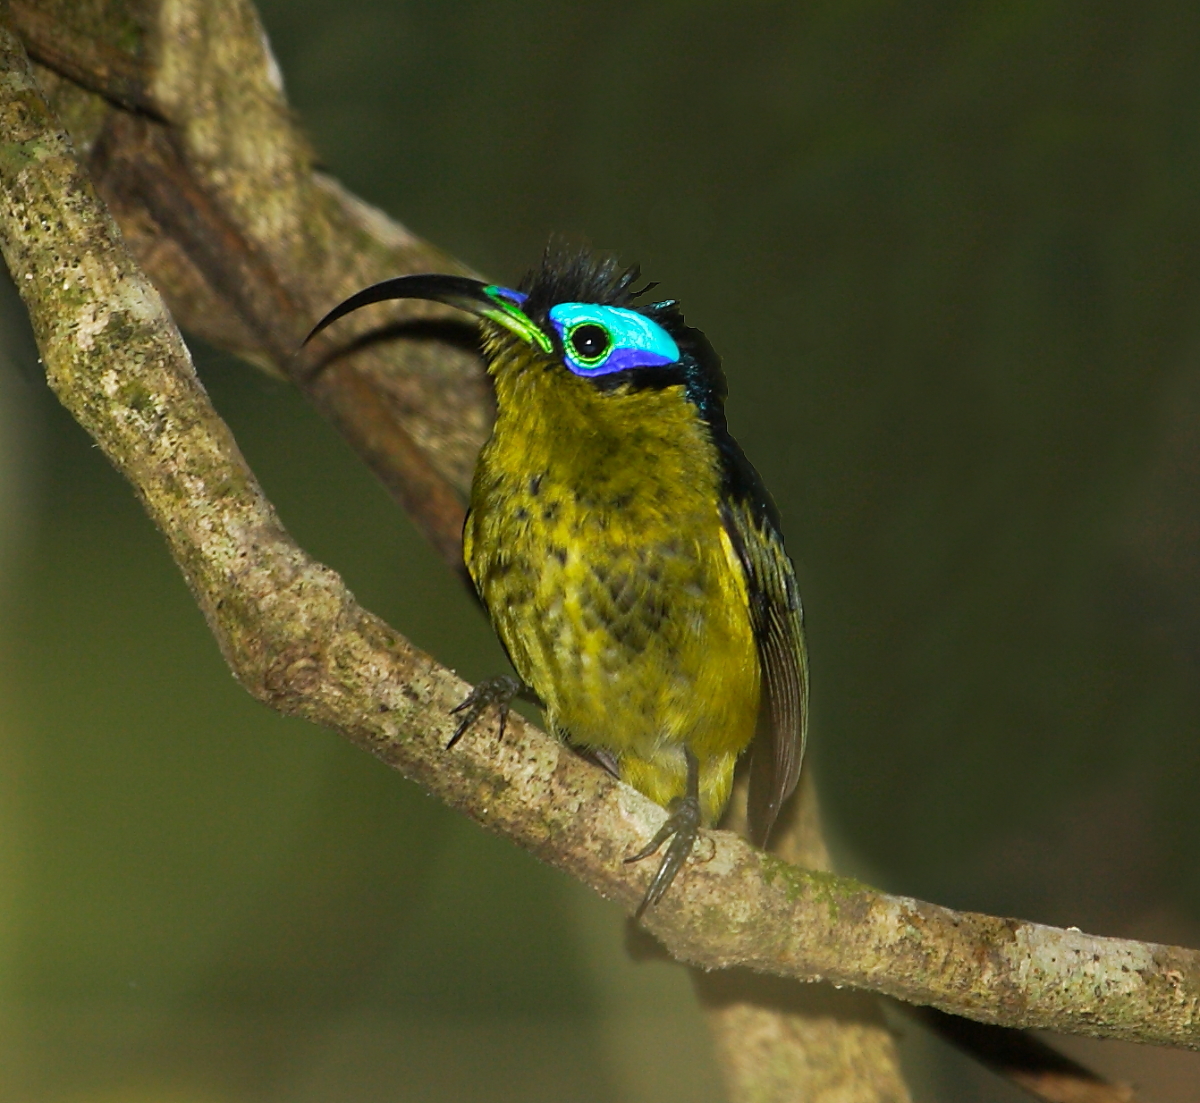 Common Sunbird-Asity is one of 4 very bizarre birds in this endemic Malagasy bird family (sometimes considered a sub-family of Broadbills)